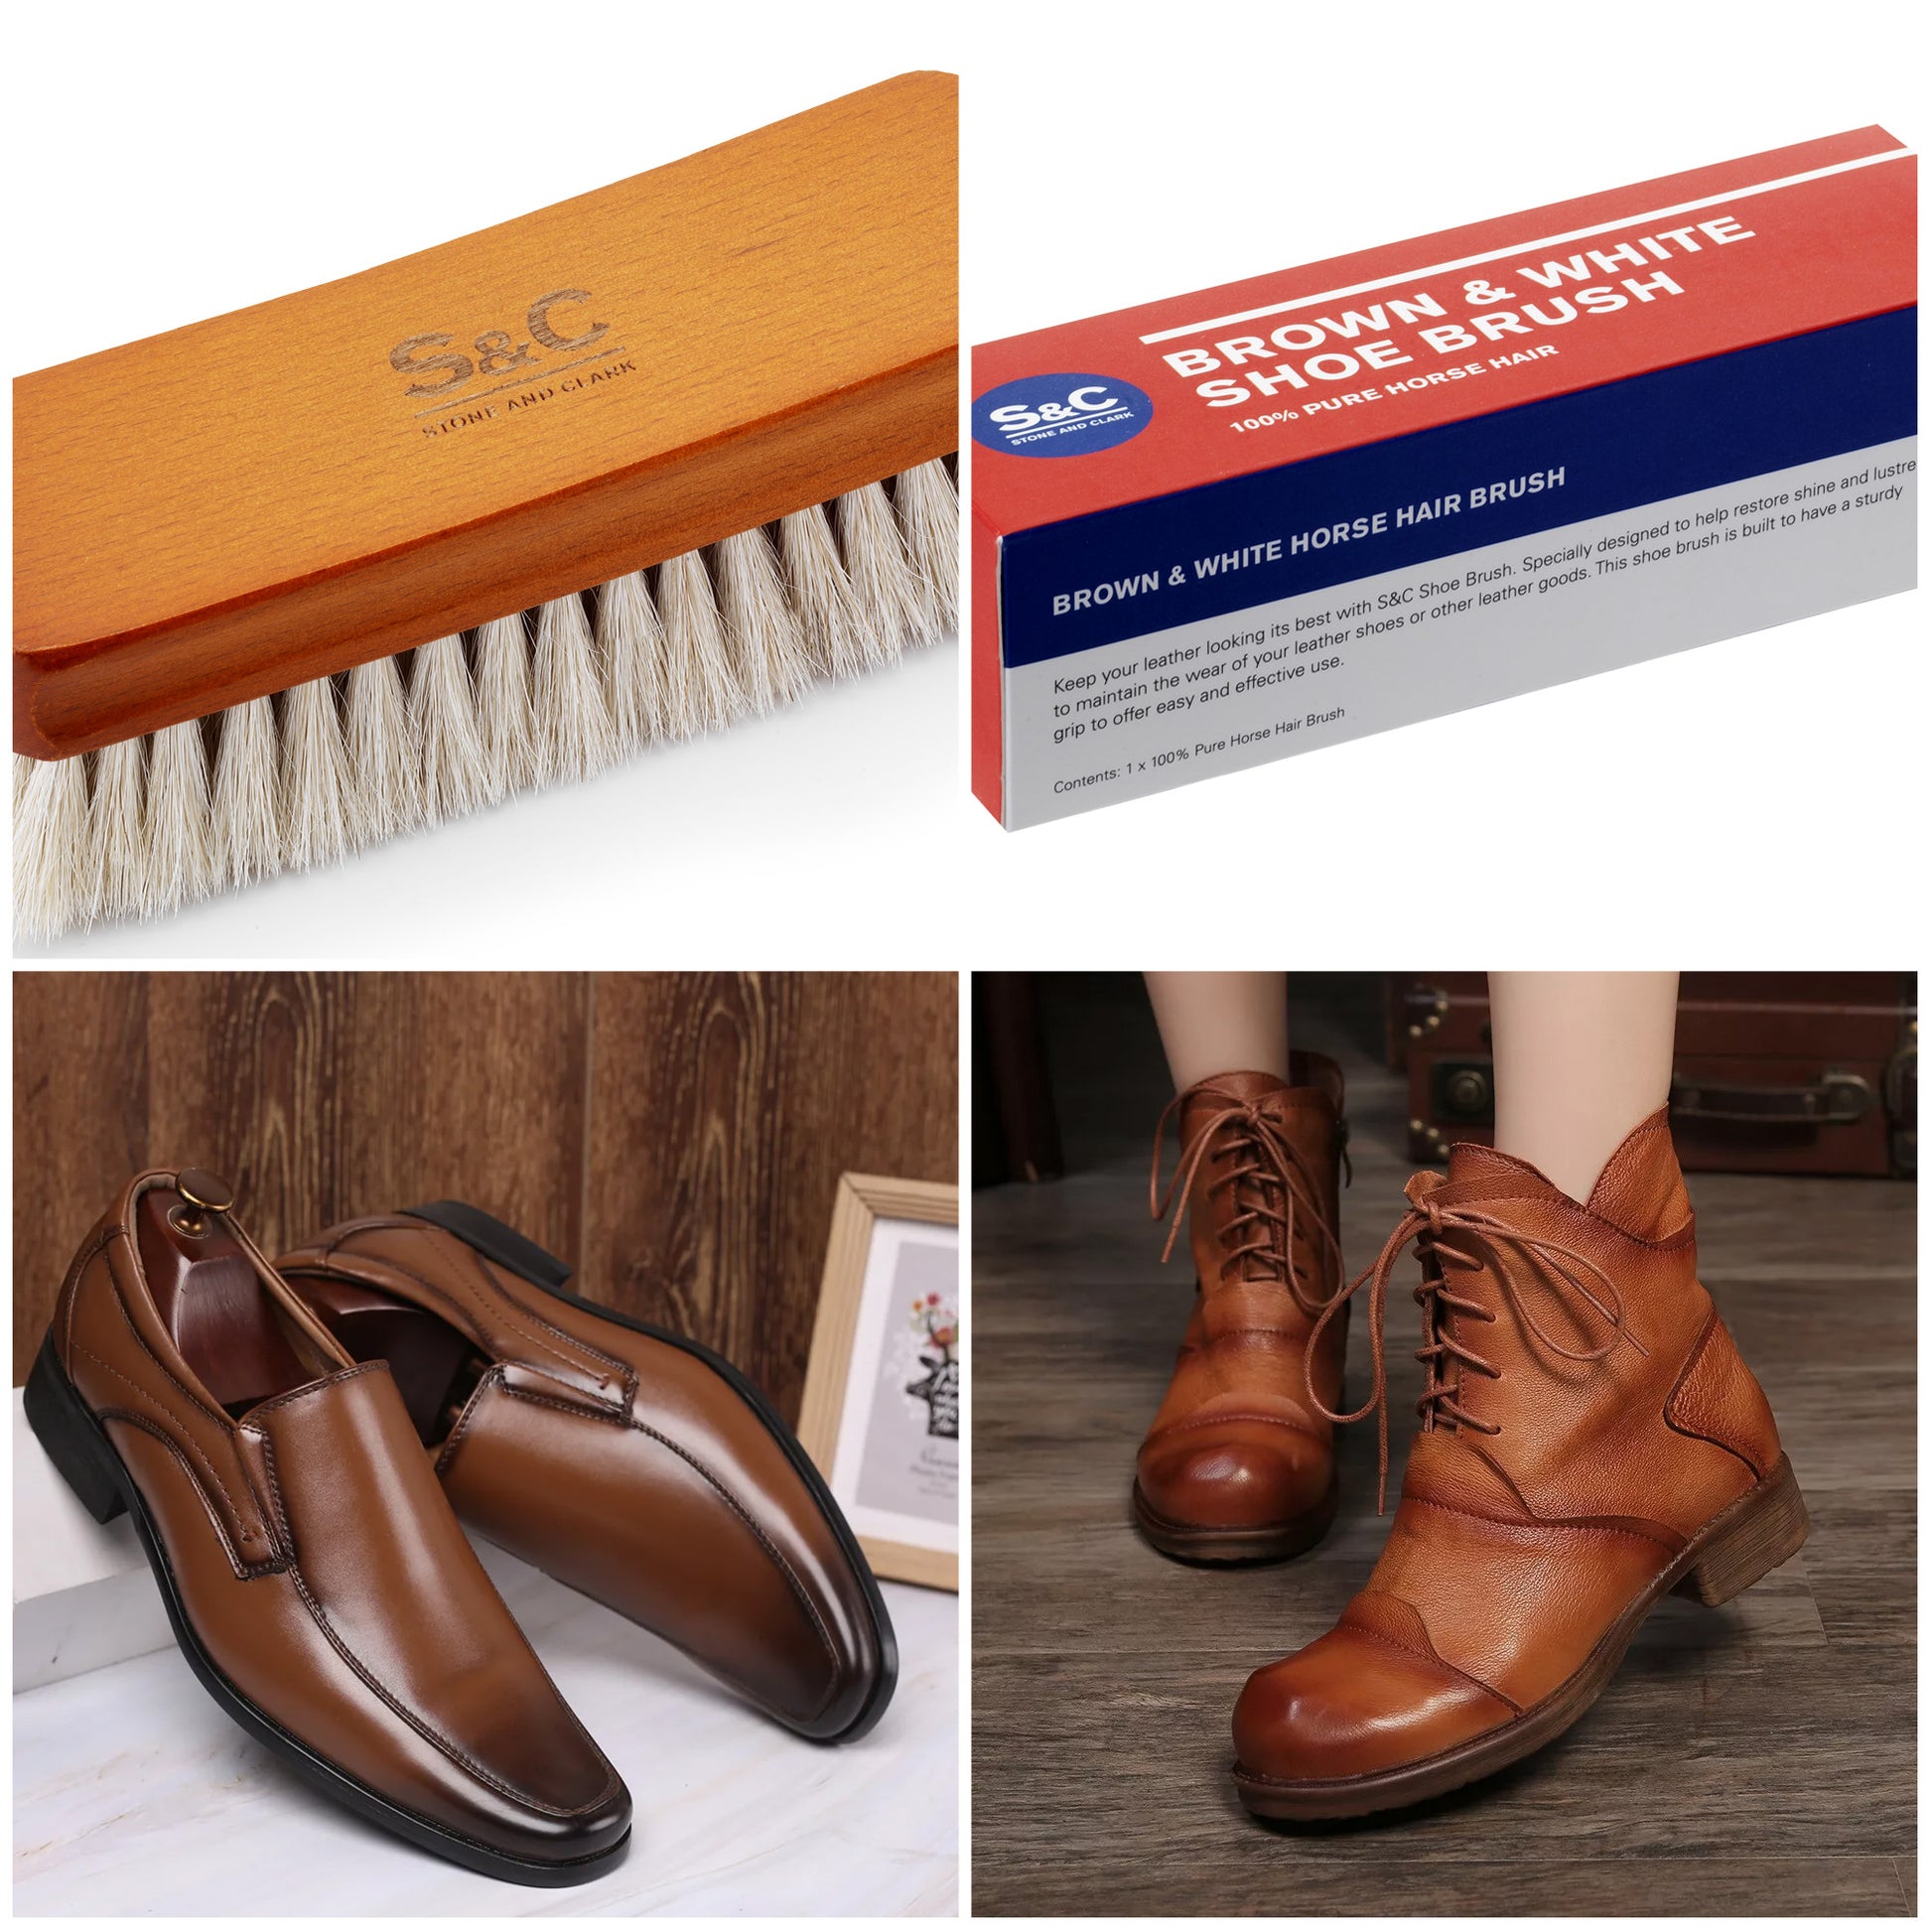 Stone and Clark Durable Horsehair Jewelry & Detail Cleaning Brushes